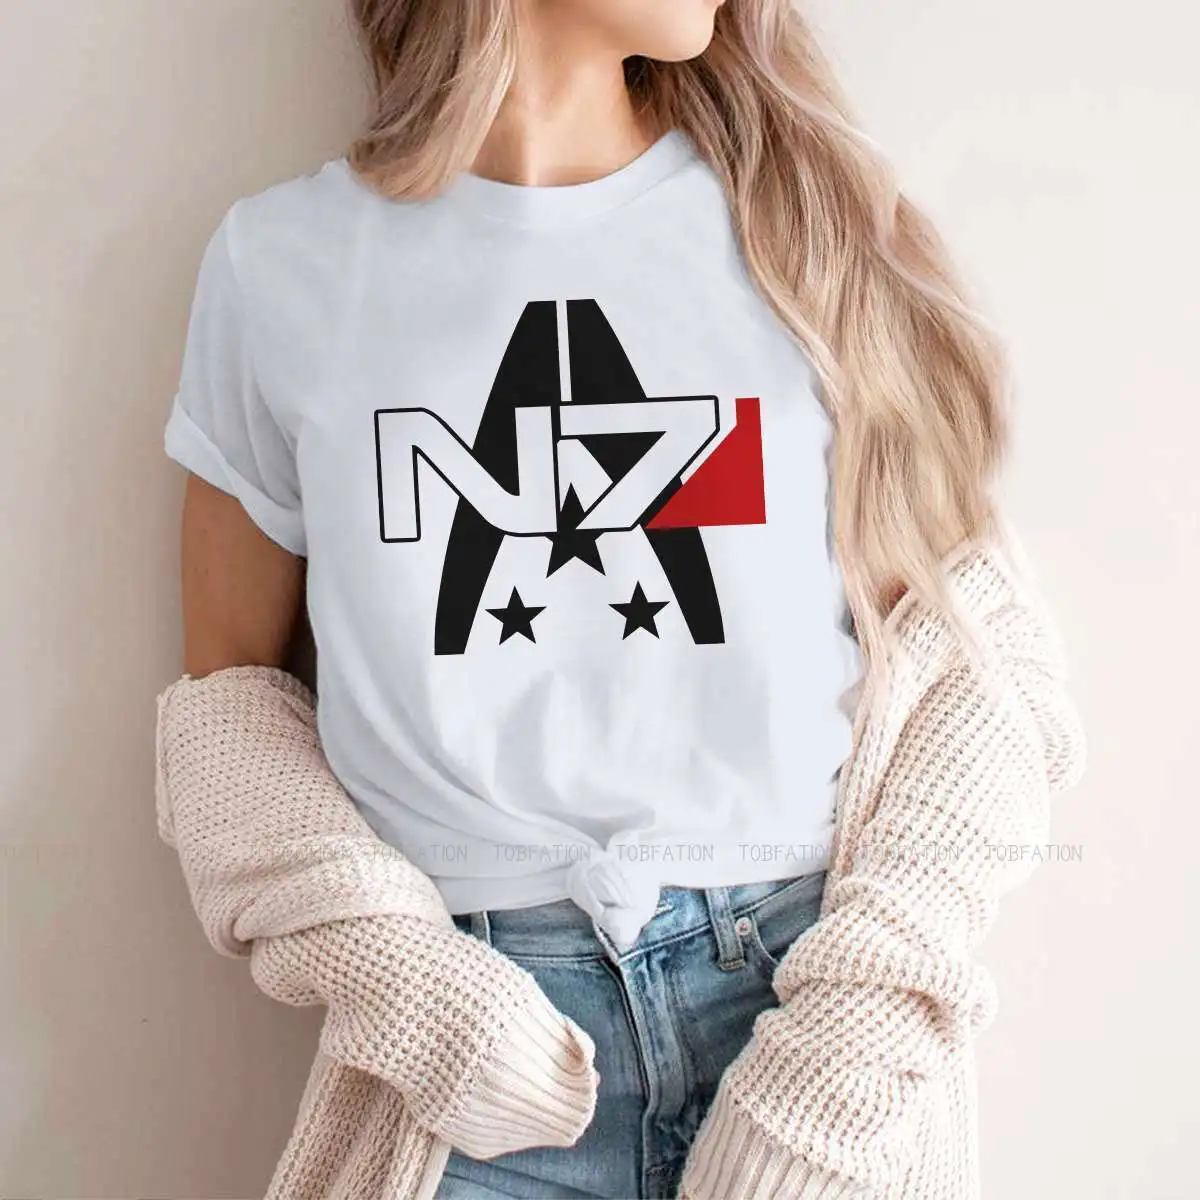 

N7 Alliance Style TShirt for Girl Mass Effect ME1 Andromeda Legendary Edition RPG Comfortable New Design Graphic T Shirt 4XL